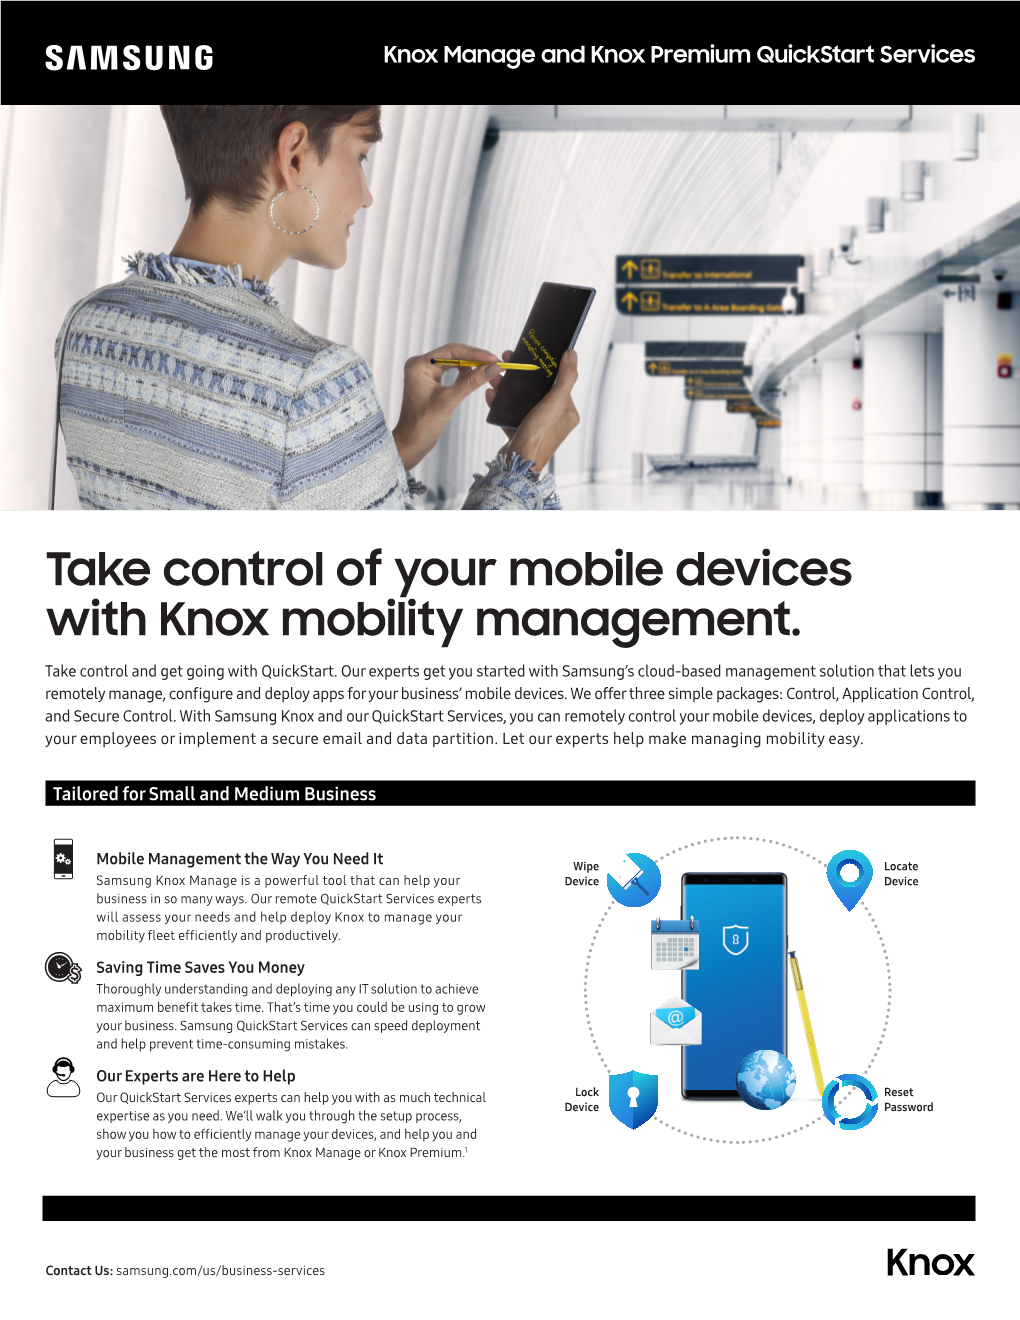 Take Control of Your Mobile Devices with Knox Mobility Management